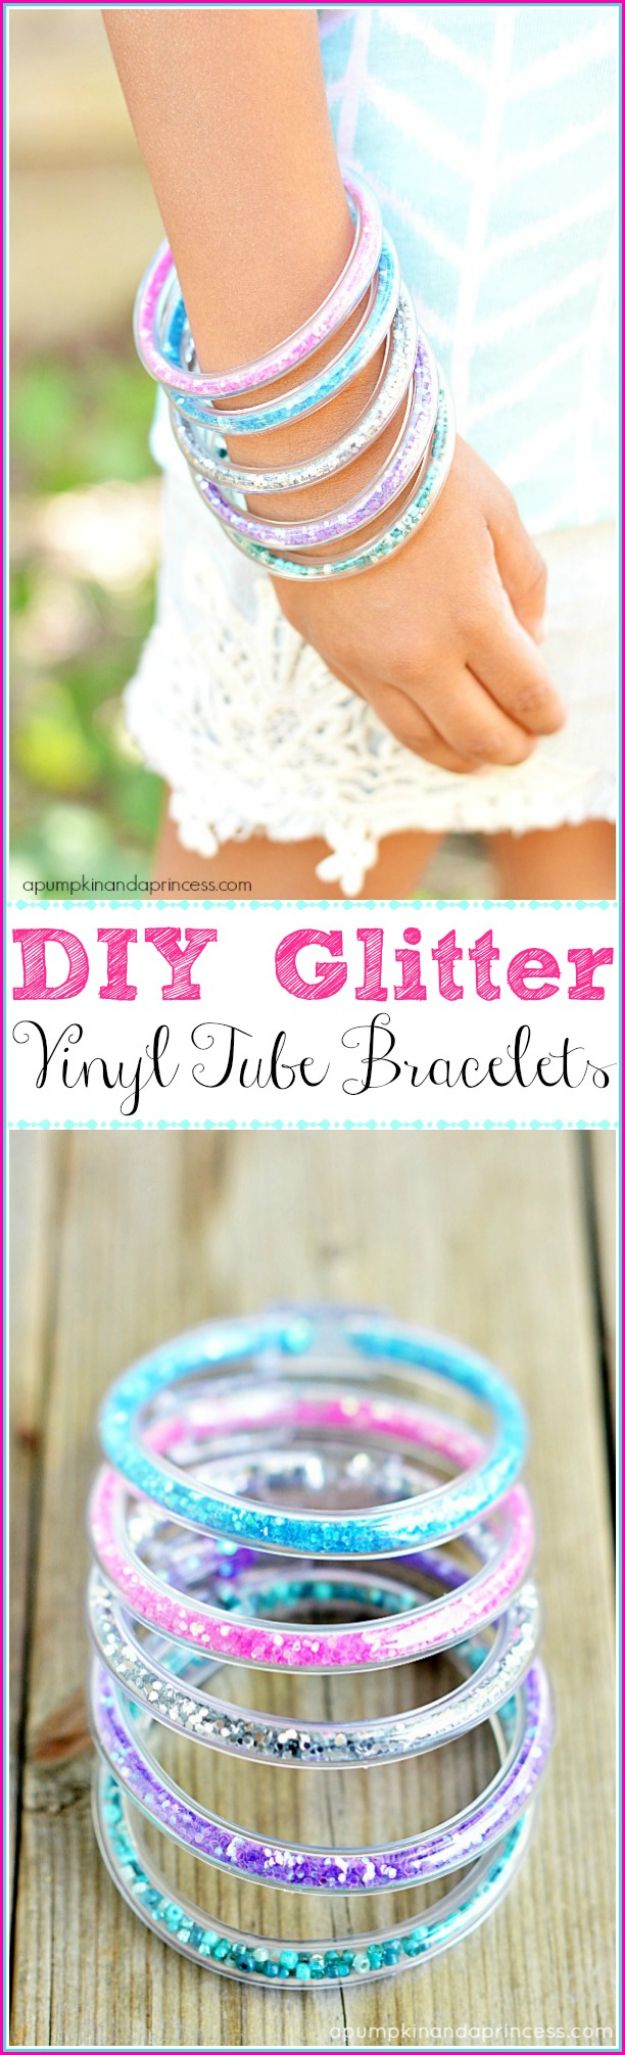 Easy Crafts for Teen Girls | Glitter Vinyl Tube Bracelets l Fun Craft and DIY Ideas for Teenagers and Tween Girl | Room Decor and Gifts